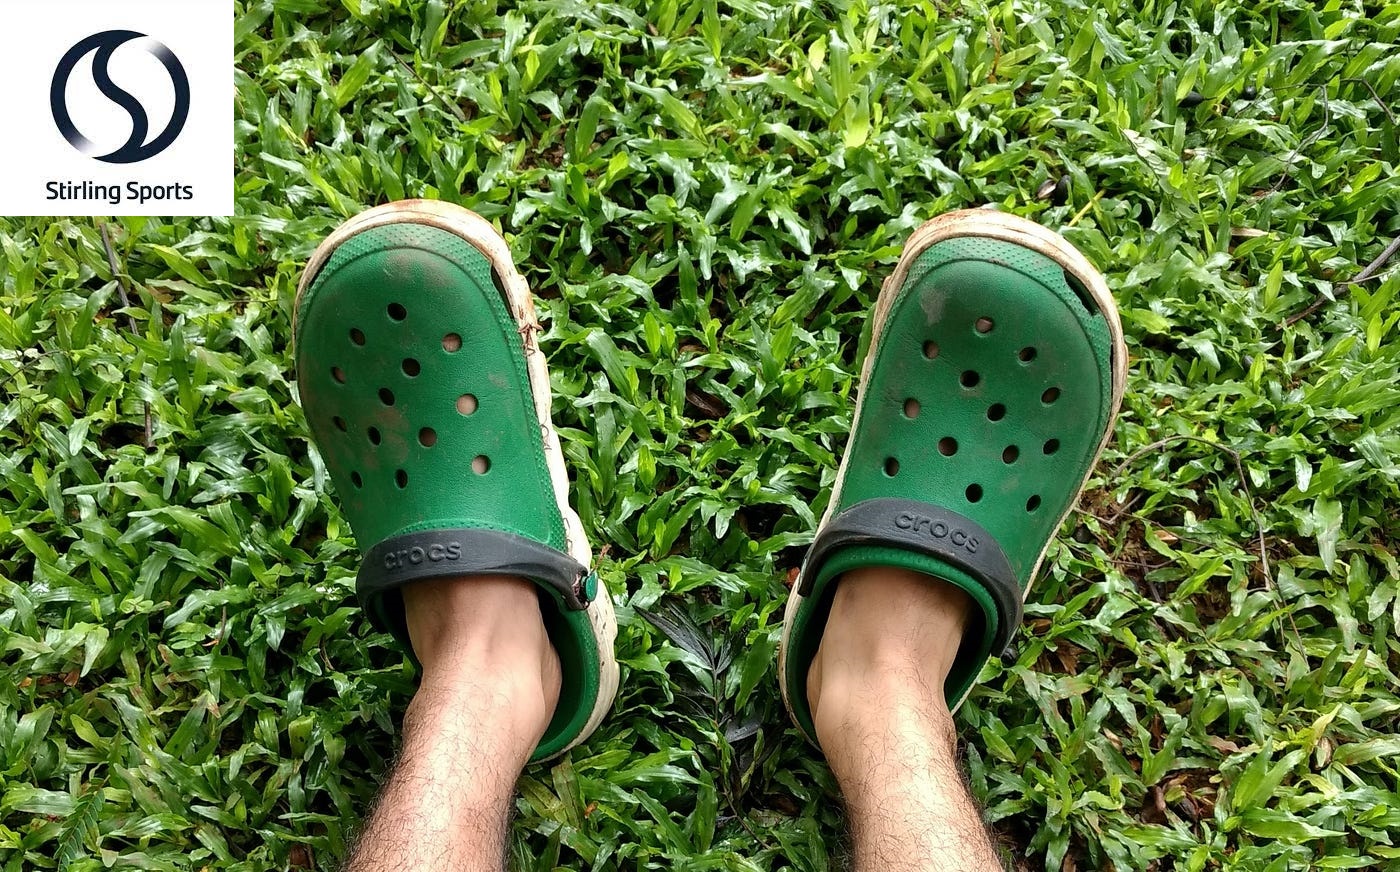 The Ultimate Guide to Finding Your Perfect Pair of Crocs Clogs